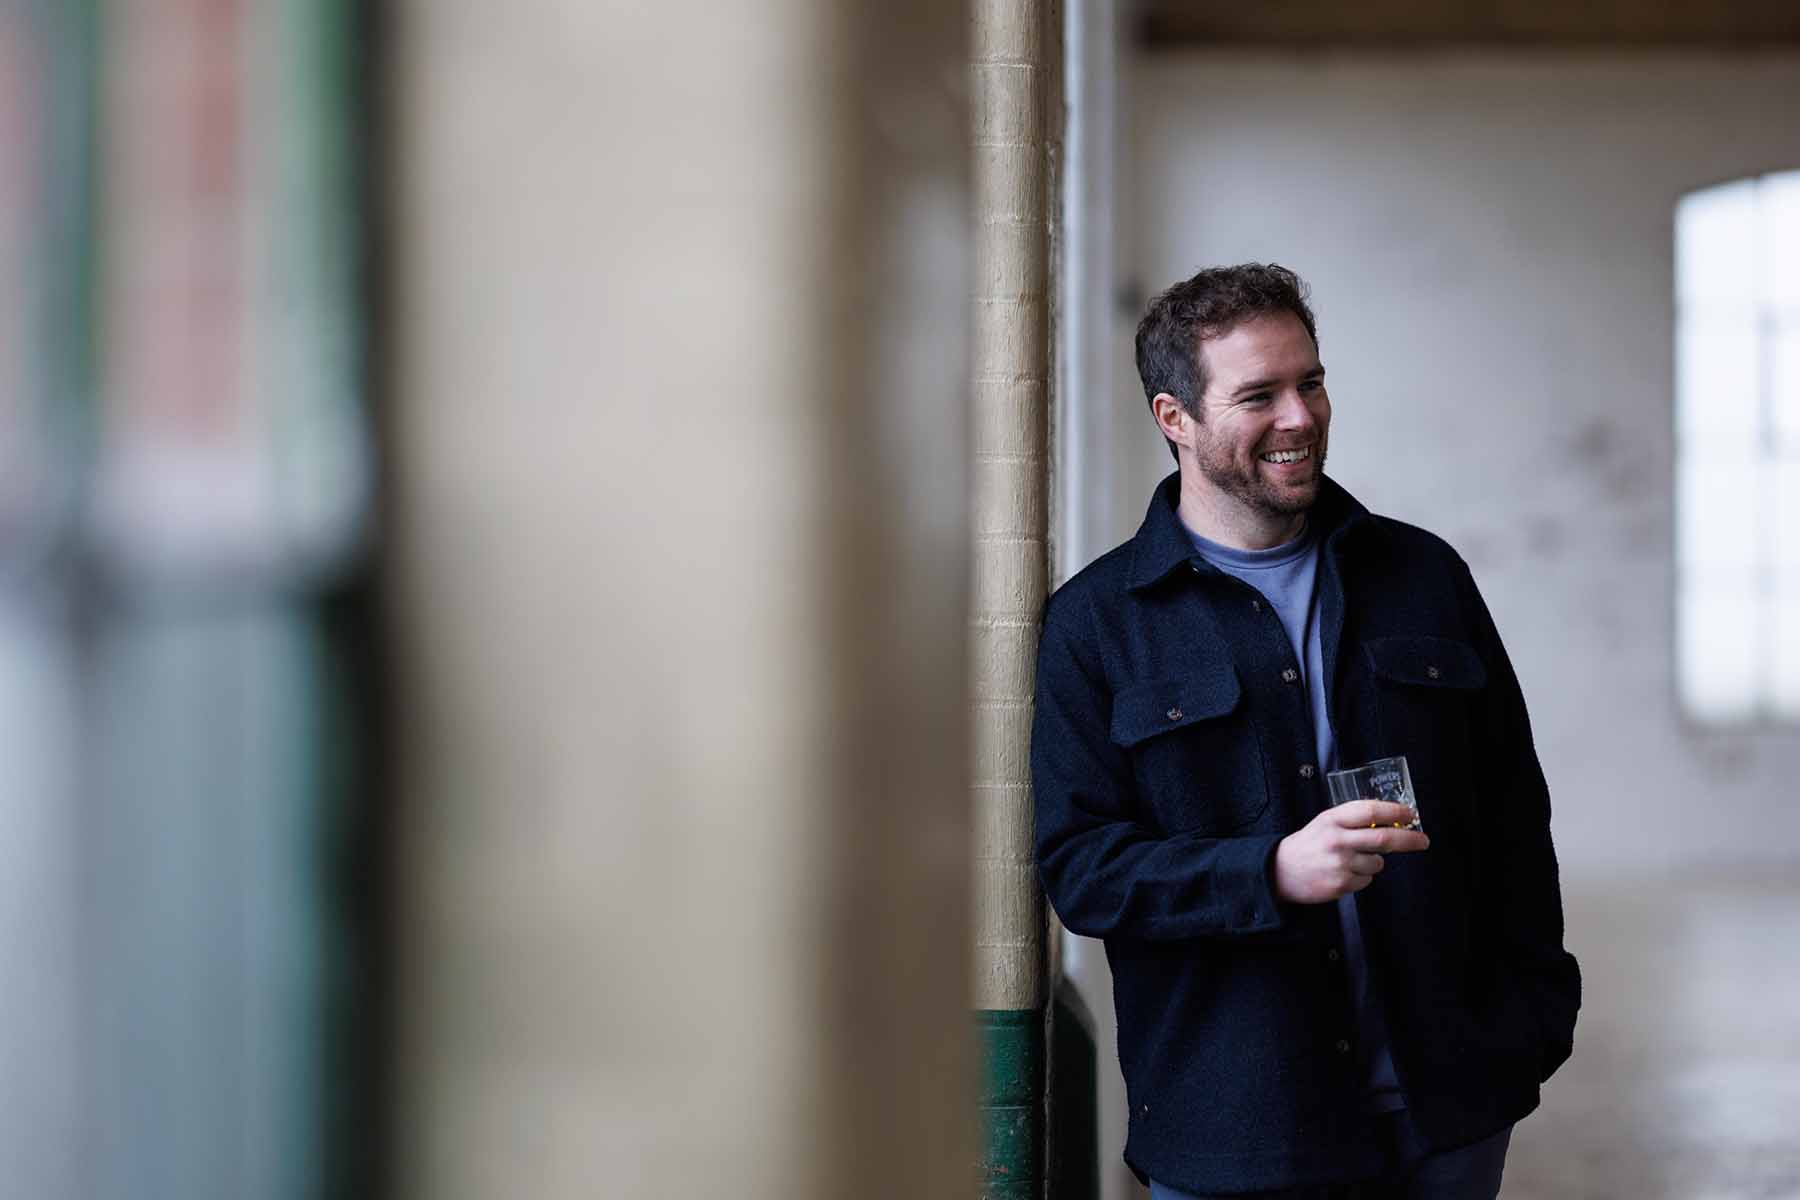 An Image of Ronan Collins Standing with a whiskey glass in hand